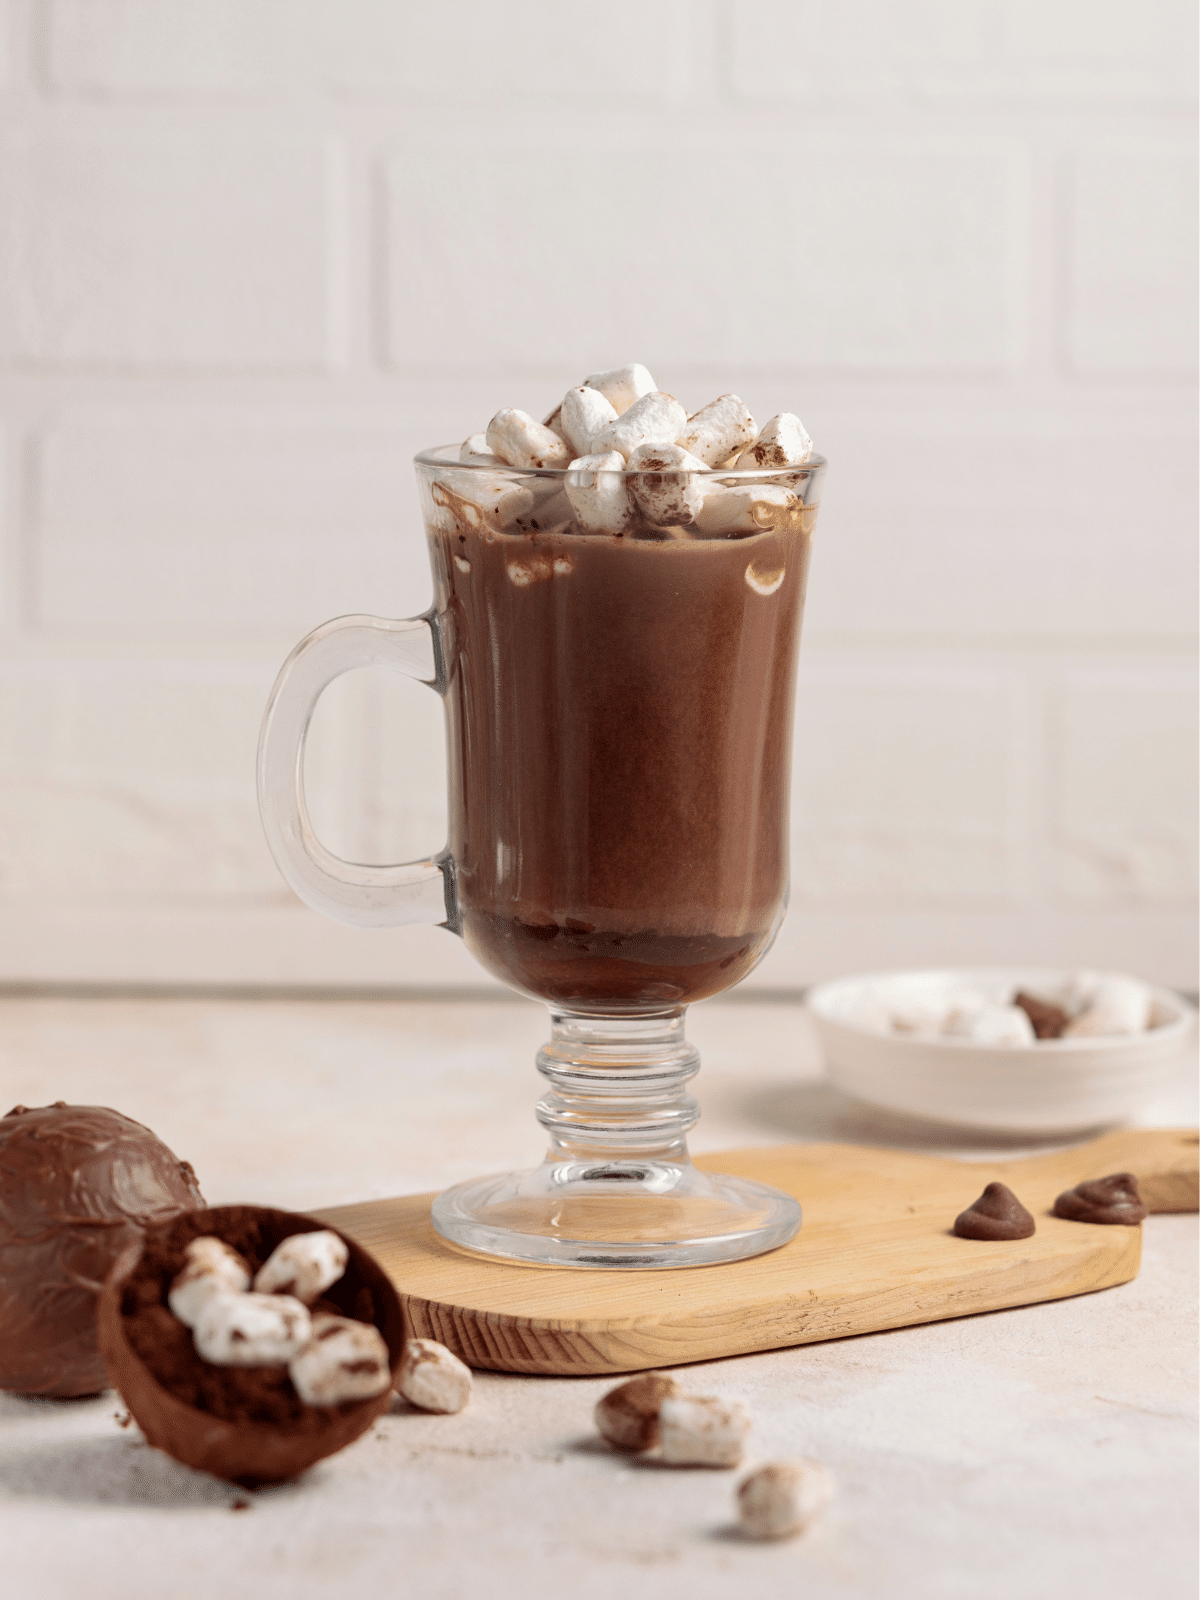 Hot cocoa bomb in a serving glass topped with marshmallows on a wooden board.